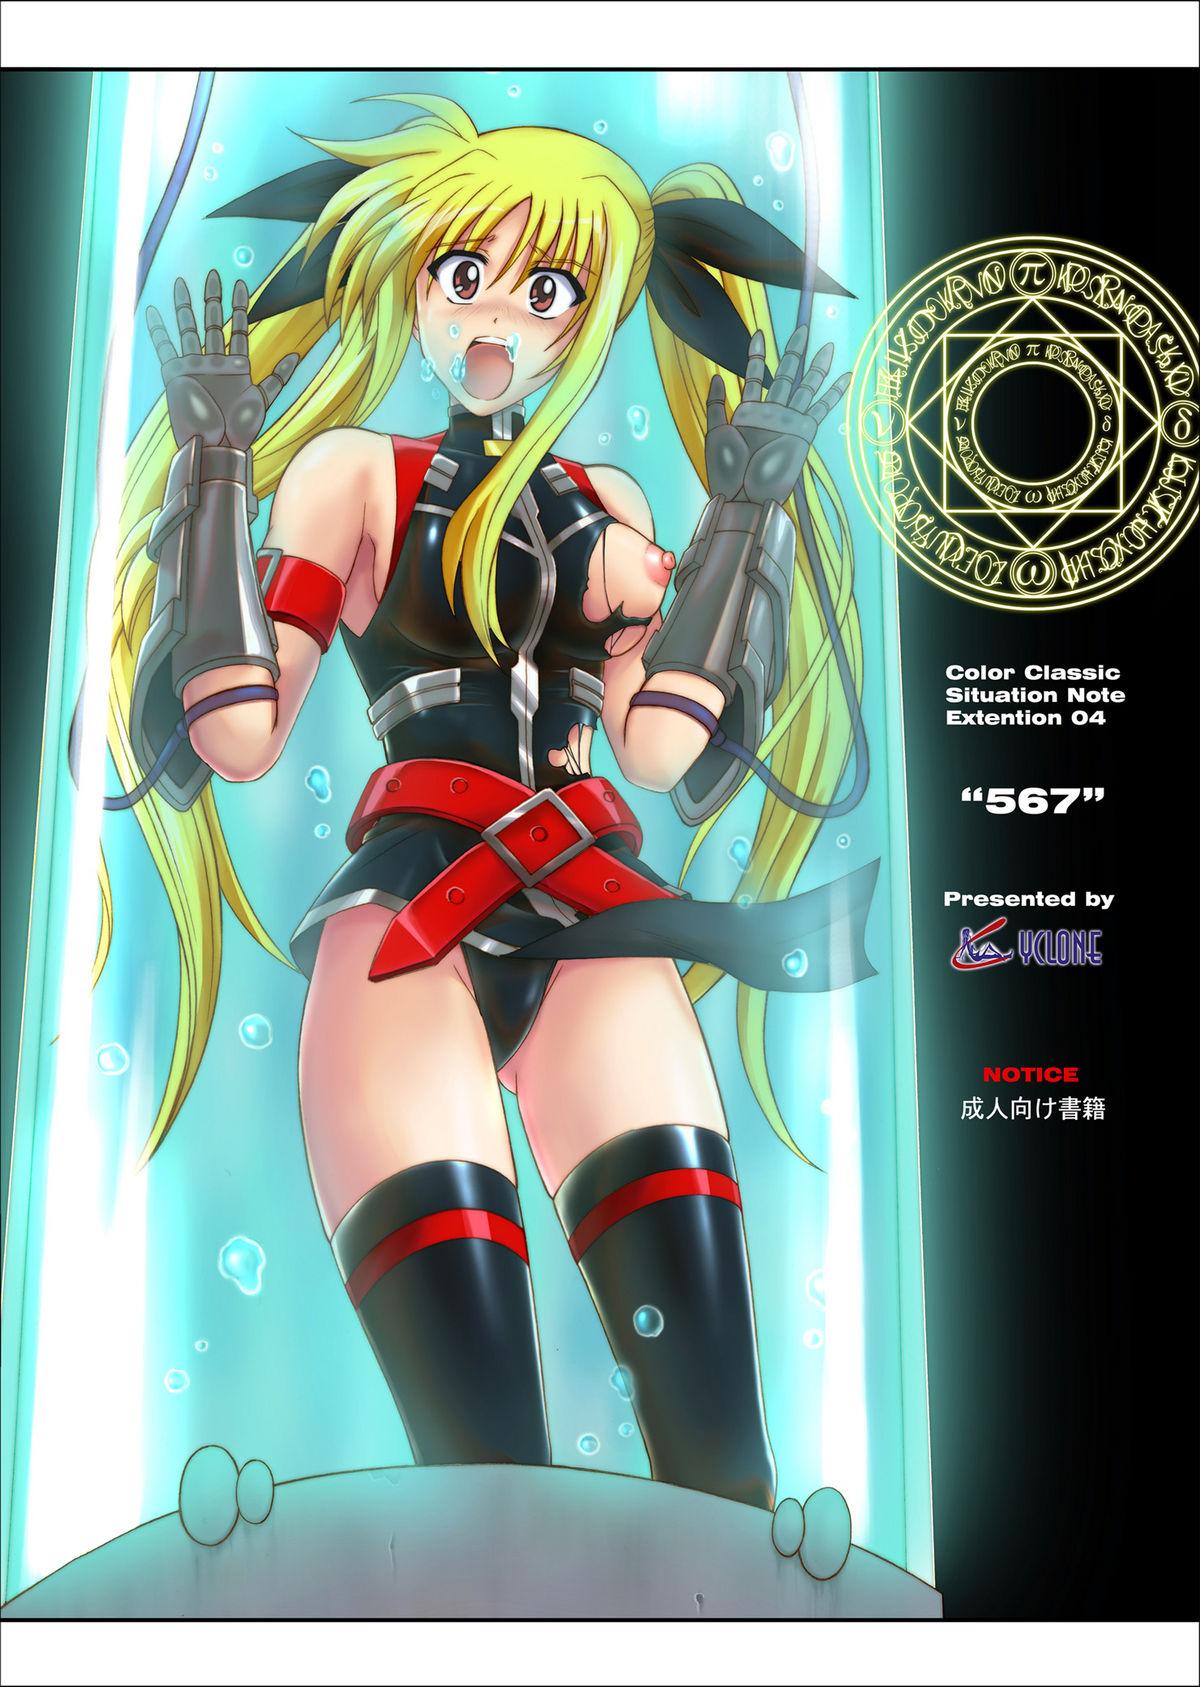 Group Color Classic Note Extension 04 "567" - Mahou shoujo lyrical nanoha Fist - Page 1